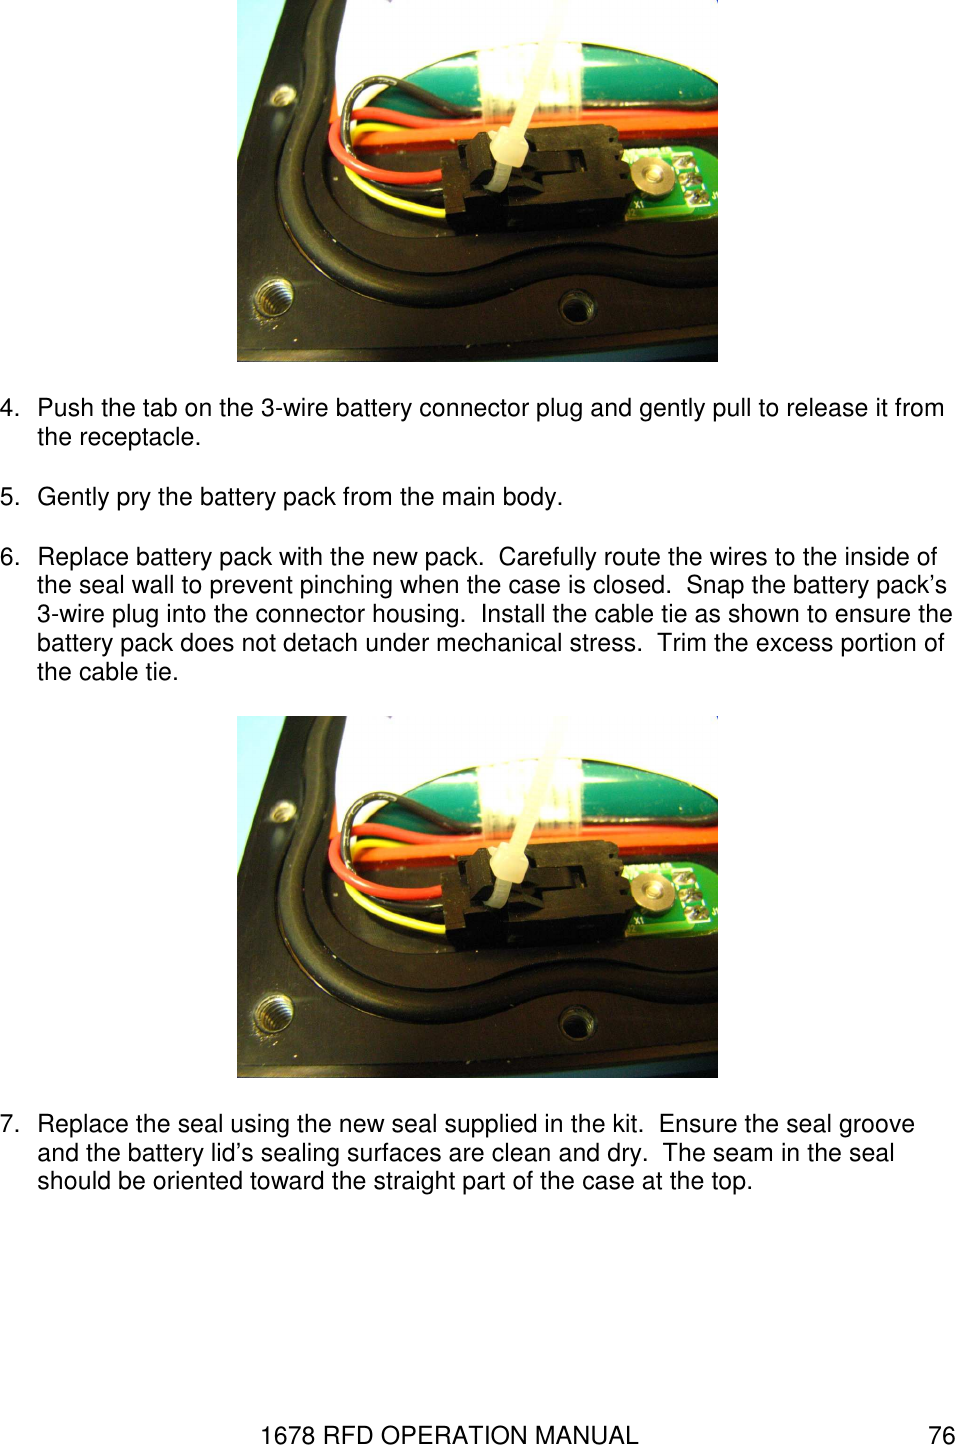 1678 RFD OPERATION MANUAL  76  4.  Push the tab on the 3-wire battery connector plug and gently pull to release it from the receptacle. 5.  Gently pry the battery pack from the main body. 6.  Replace battery pack with the new pack.  Carefully route the wires to the inside of the seal wall to prevent pinching when the case is closed.  Snap the battery pack’s 3-wire plug into the connector housing.  Install the cable tie as shown to ensure the battery pack does not detach under mechanical stress.  Trim the excess portion of the cable tie.  7.  Replace the seal using the new seal supplied in the kit.  Ensure the seal groove and the battery lid’s sealing surfaces are clean and dry.  The seam in the seal should be oriented toward the straight part of the case at the top. 